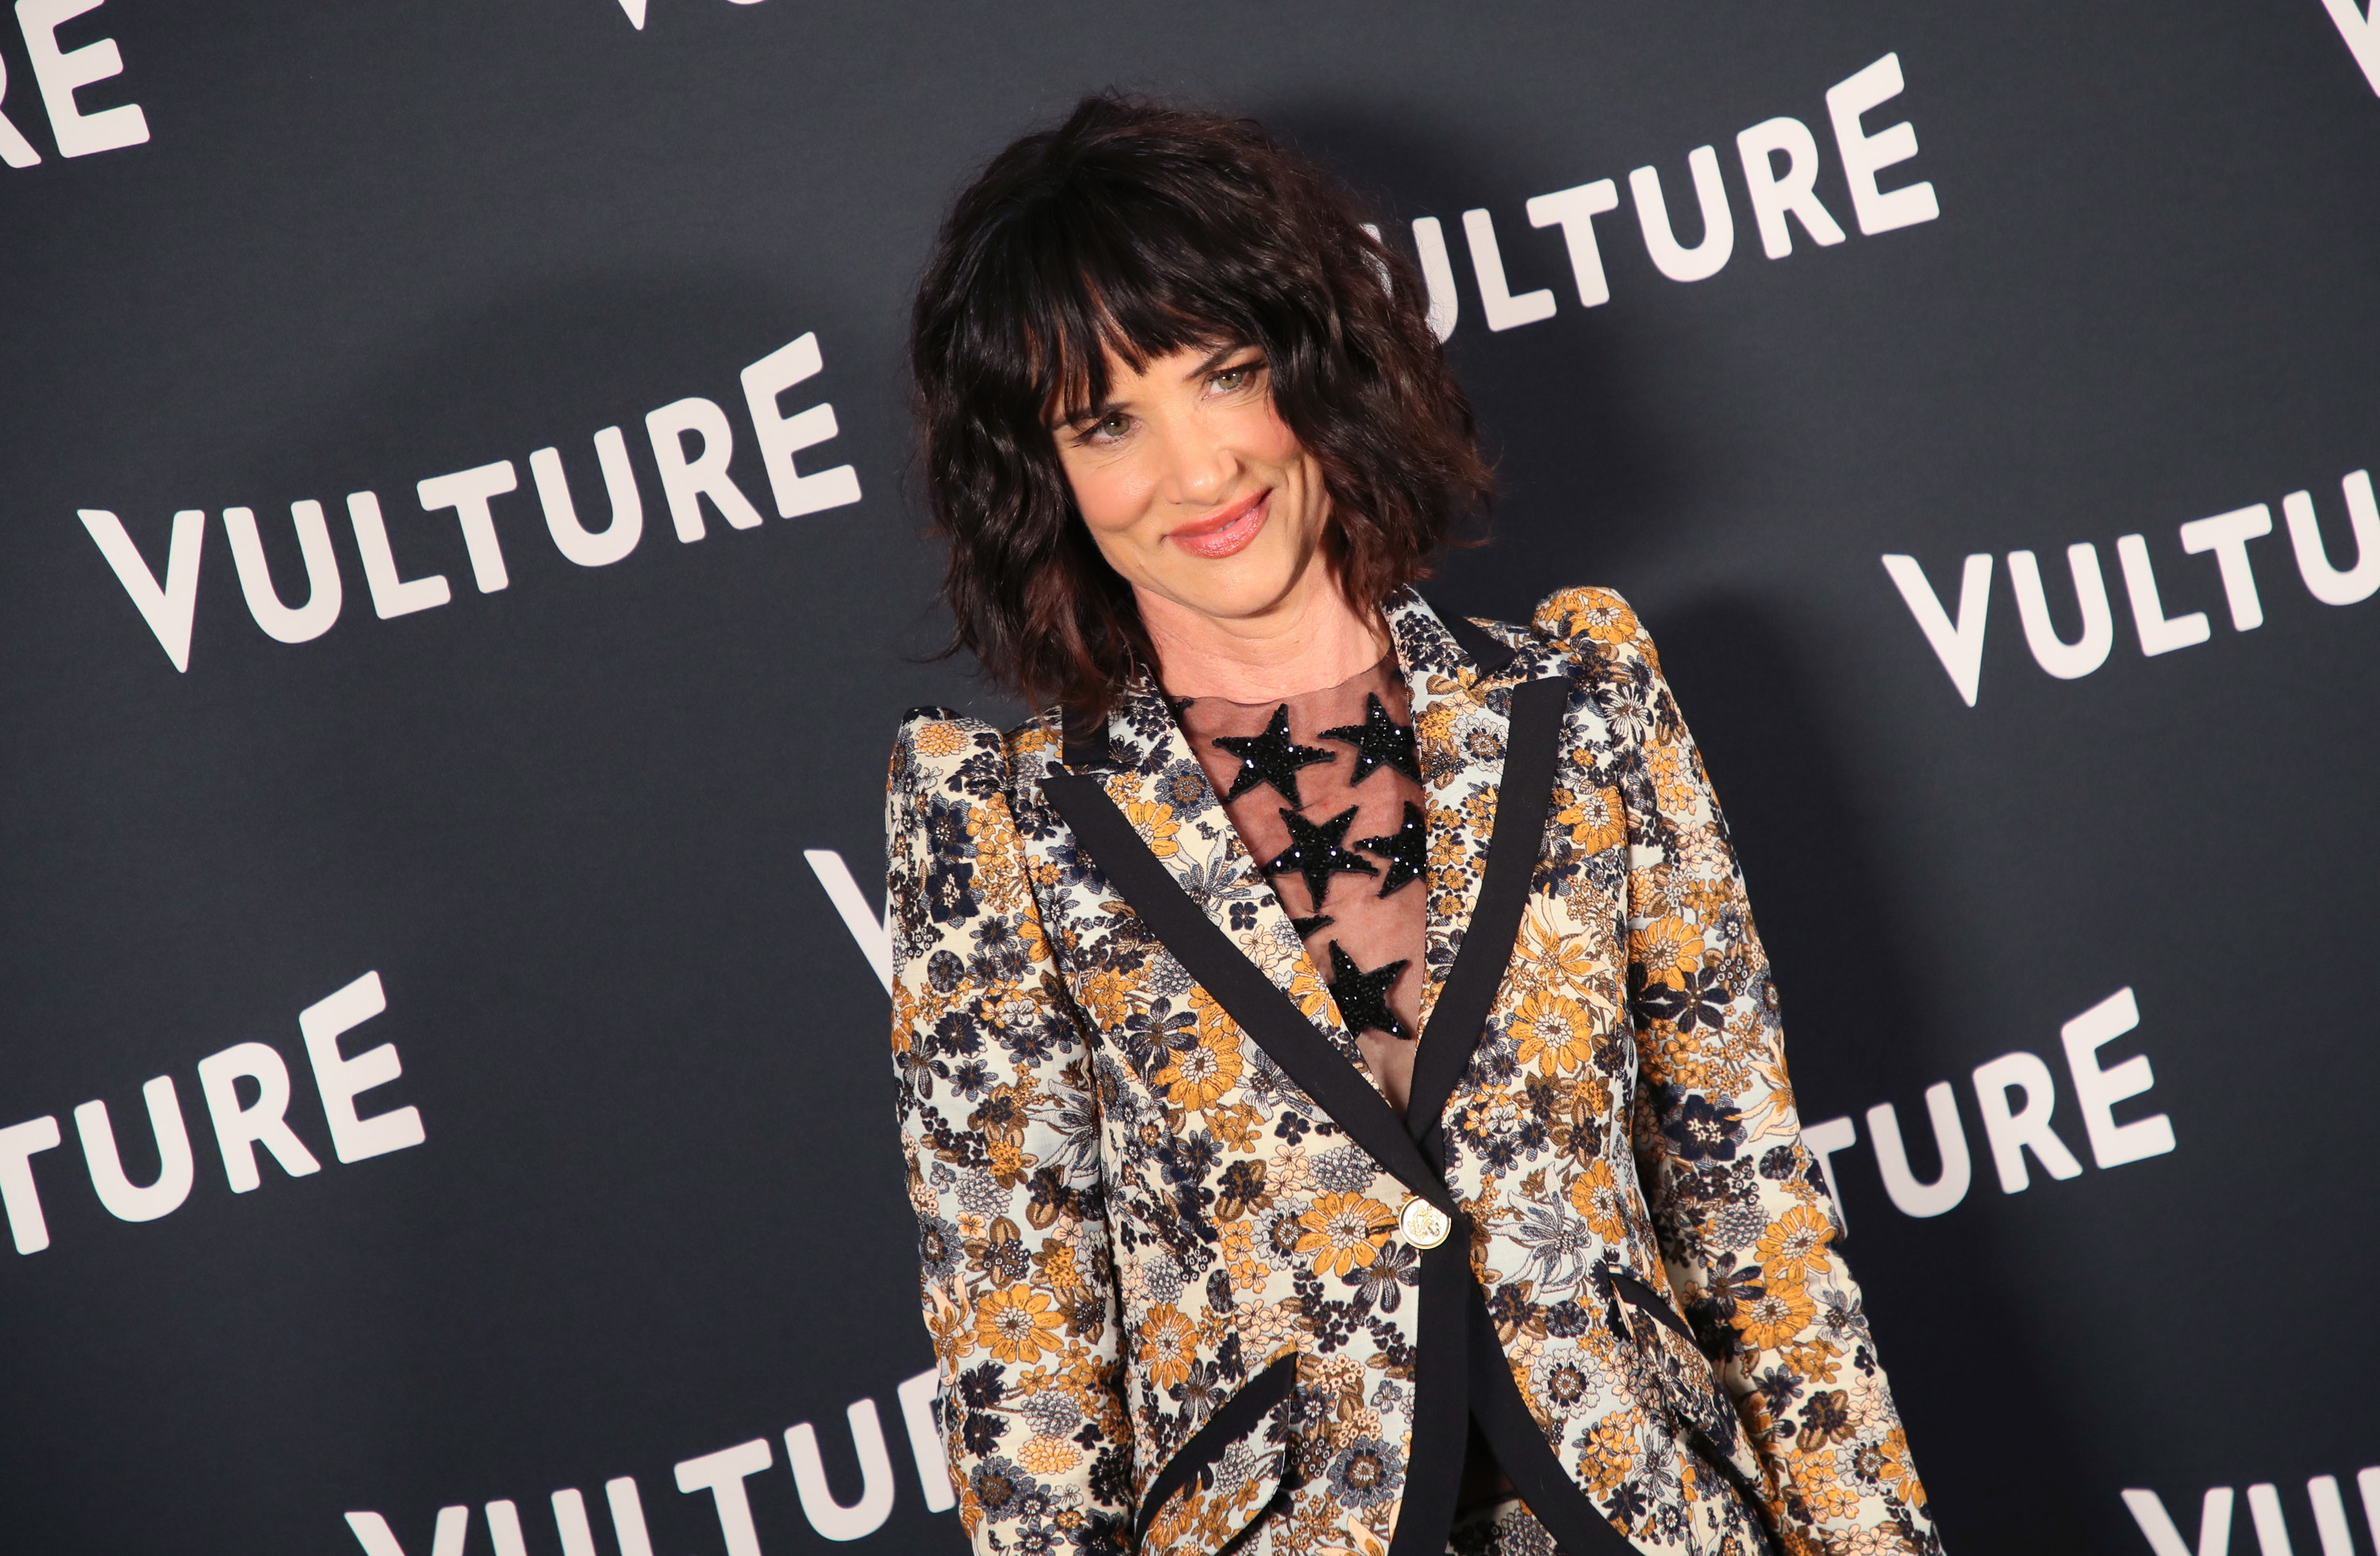 Juliette Lewis at the 2021 Vulture Festival in Los Angeles, CA